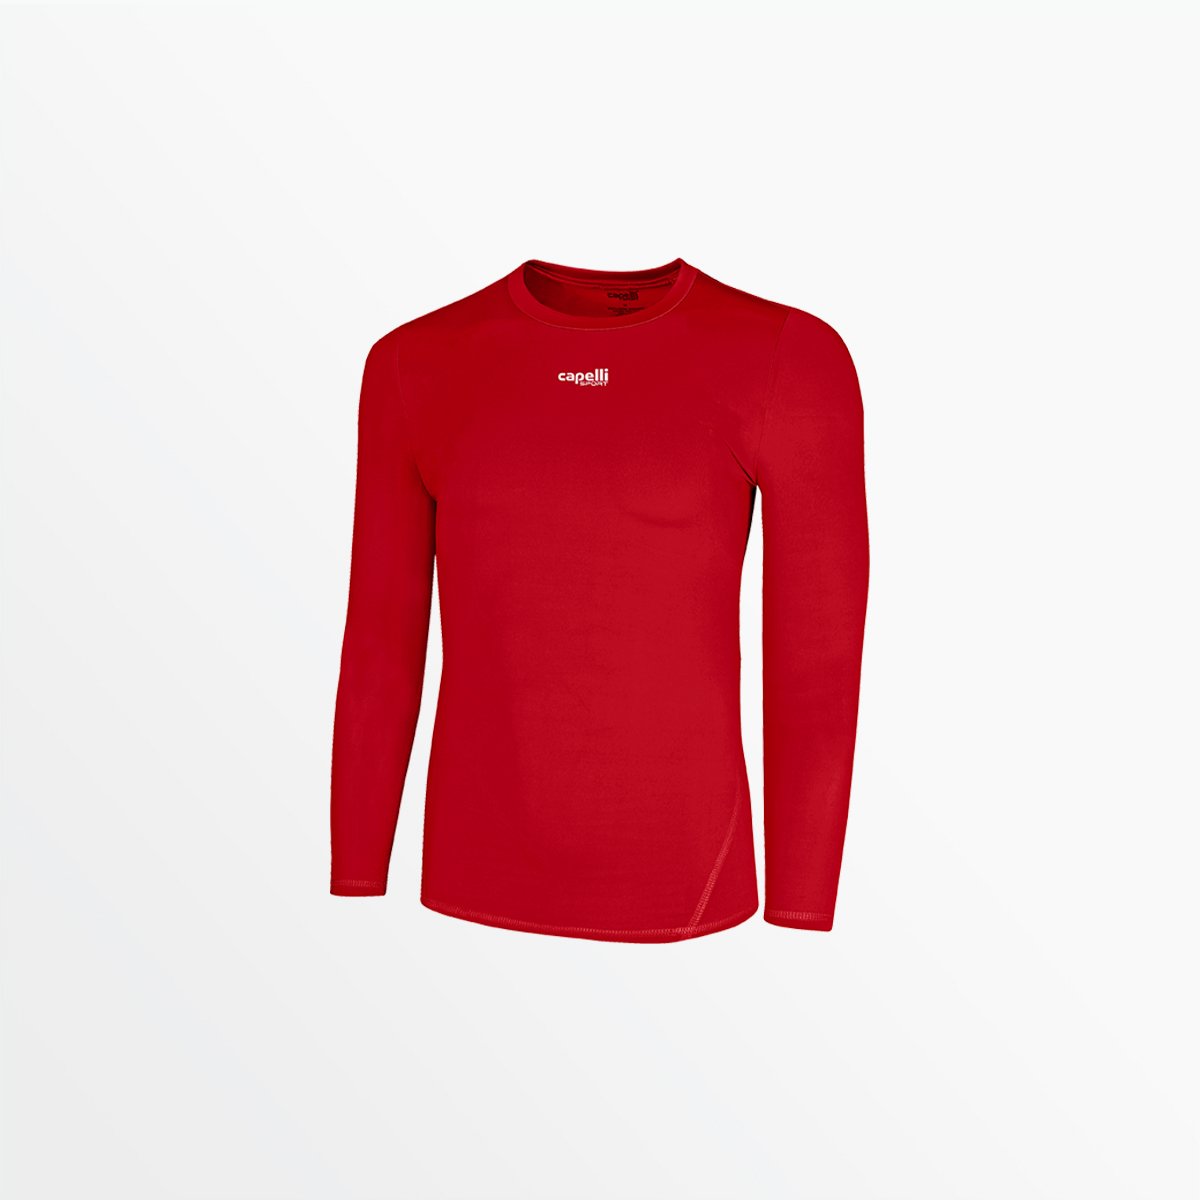 YOUTH LONG SLEEVE PERFORMANCE TOP